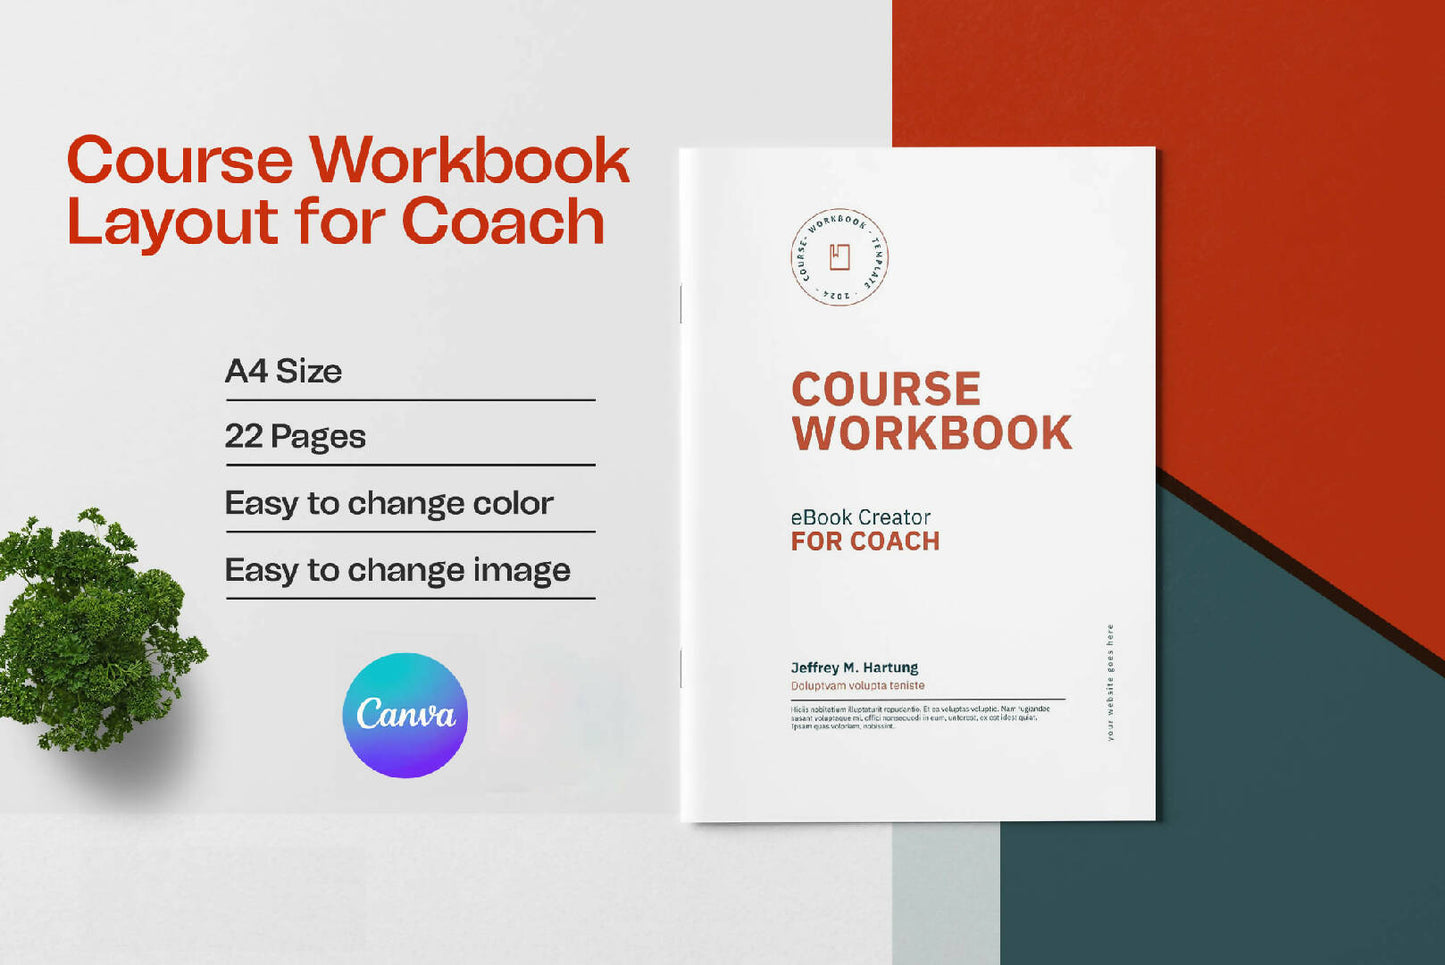 Course Workbook Canva Template Layout for Coach